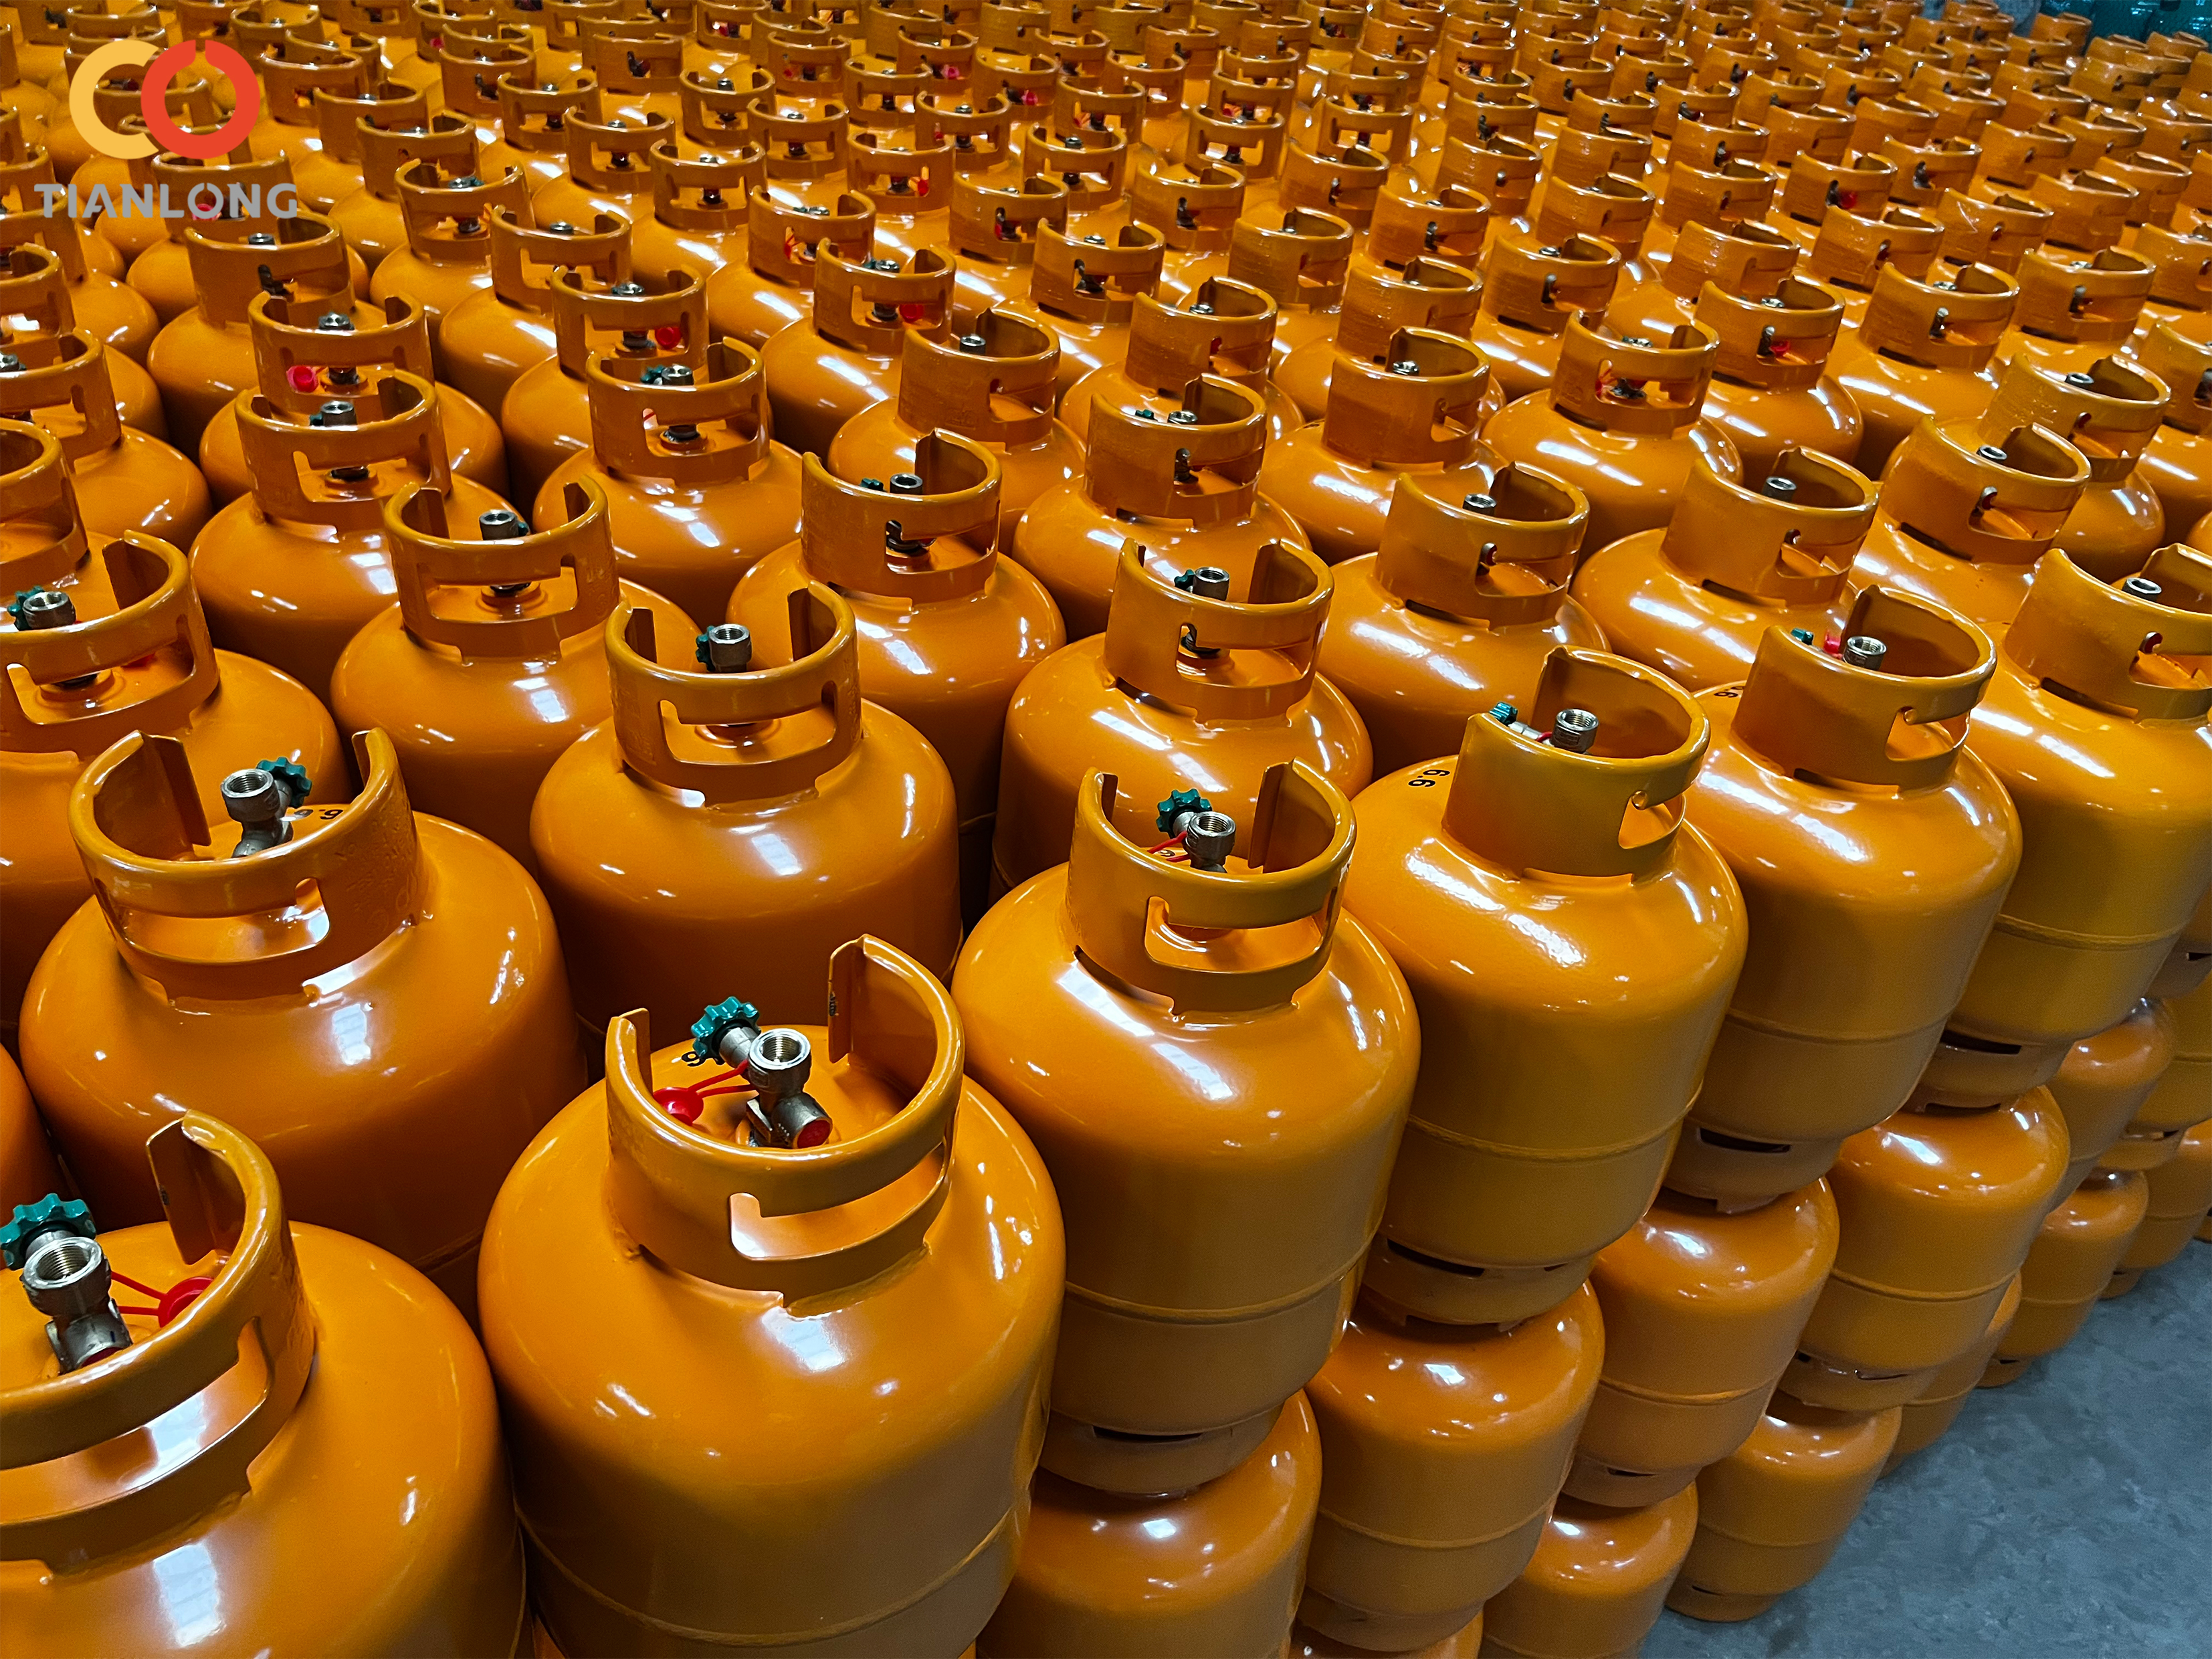 How to use gas cylinder safely?